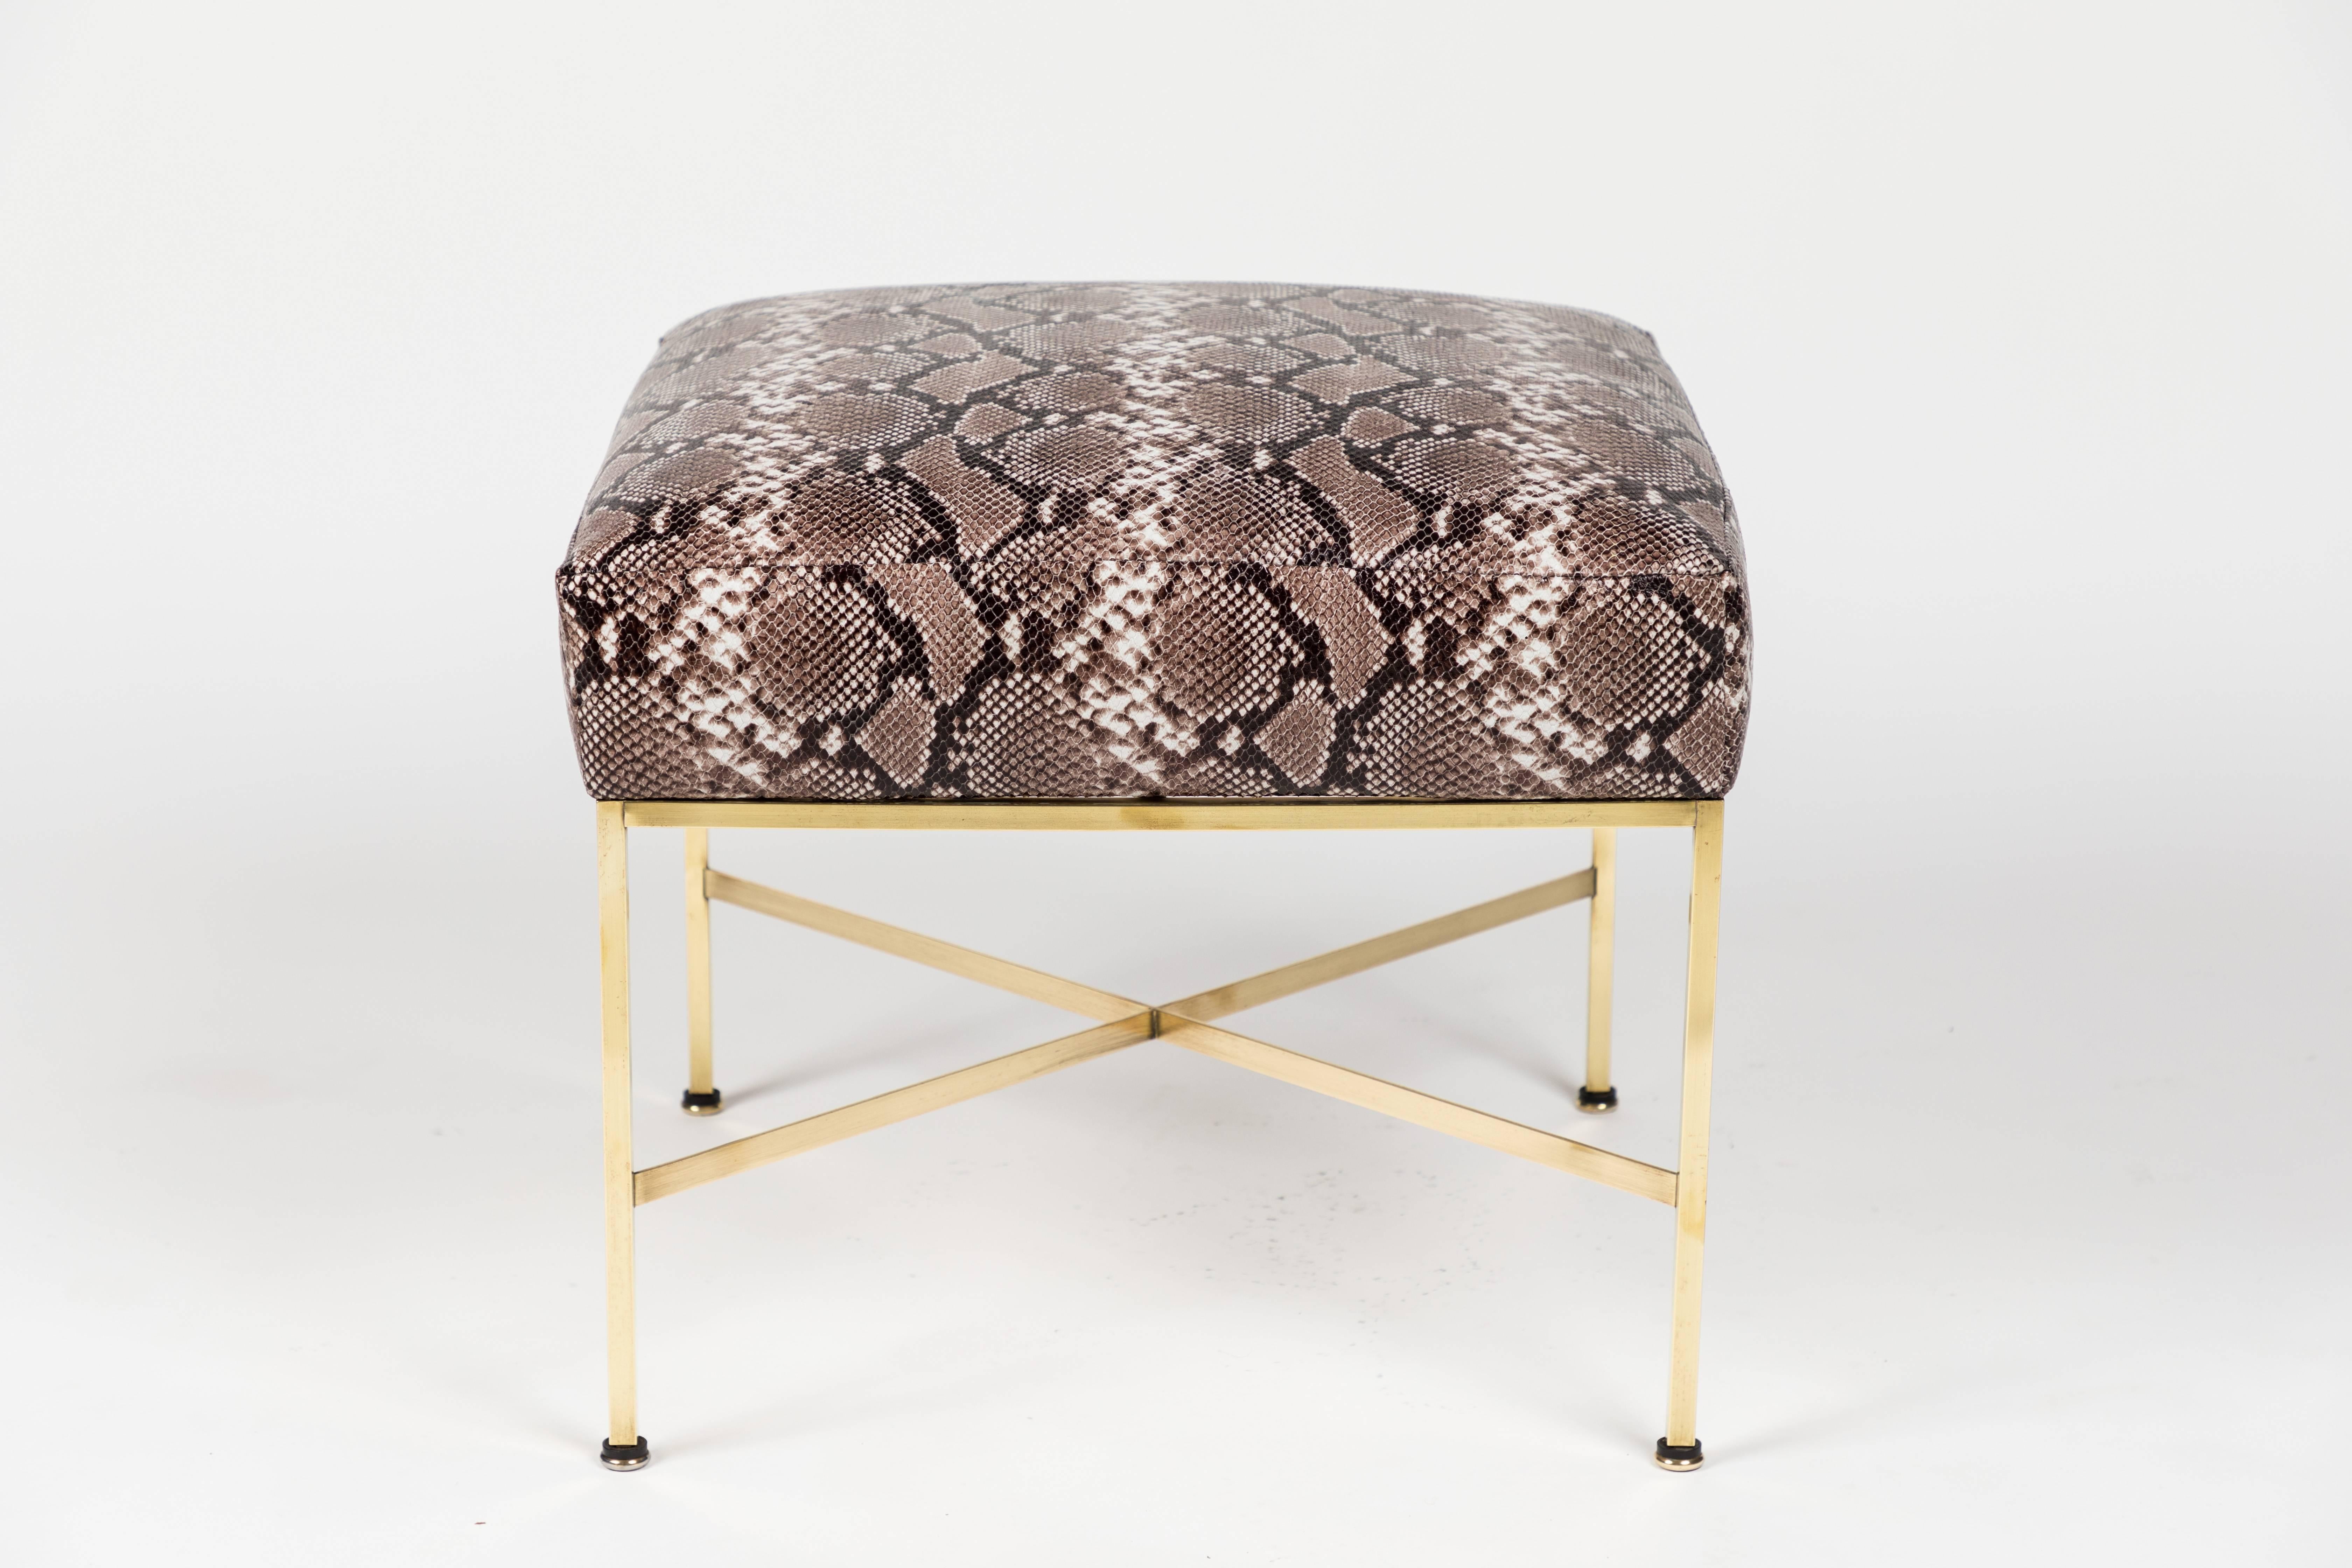 Pair of Brass and Python-Printed Leather Stools by Paul McCobb 1